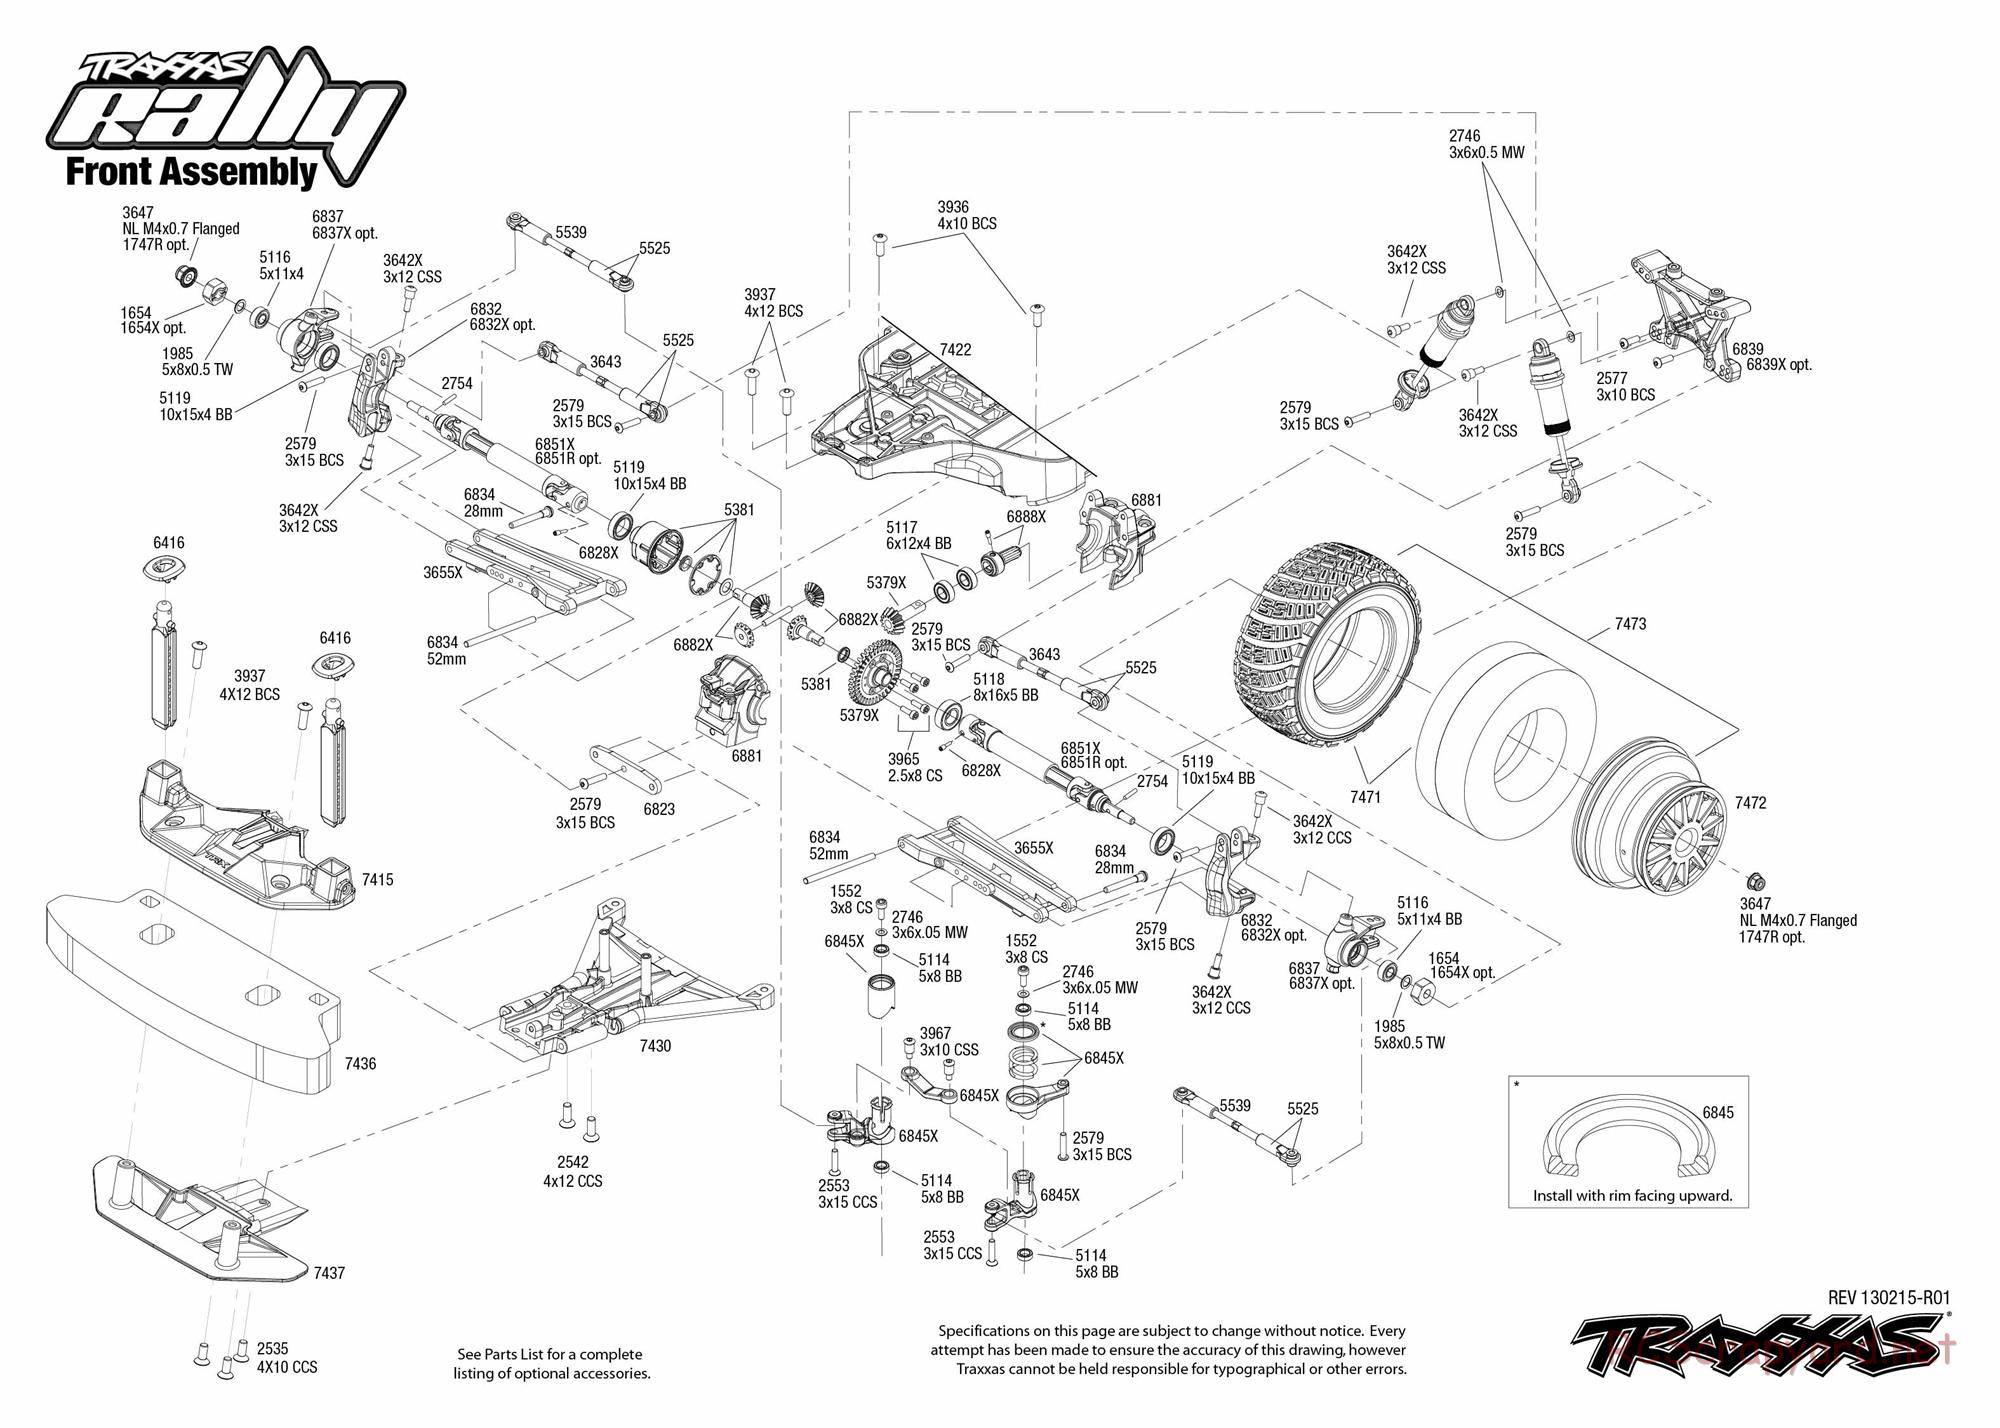 Traxxas - Rally (2012) - Exploded Views - Page 3